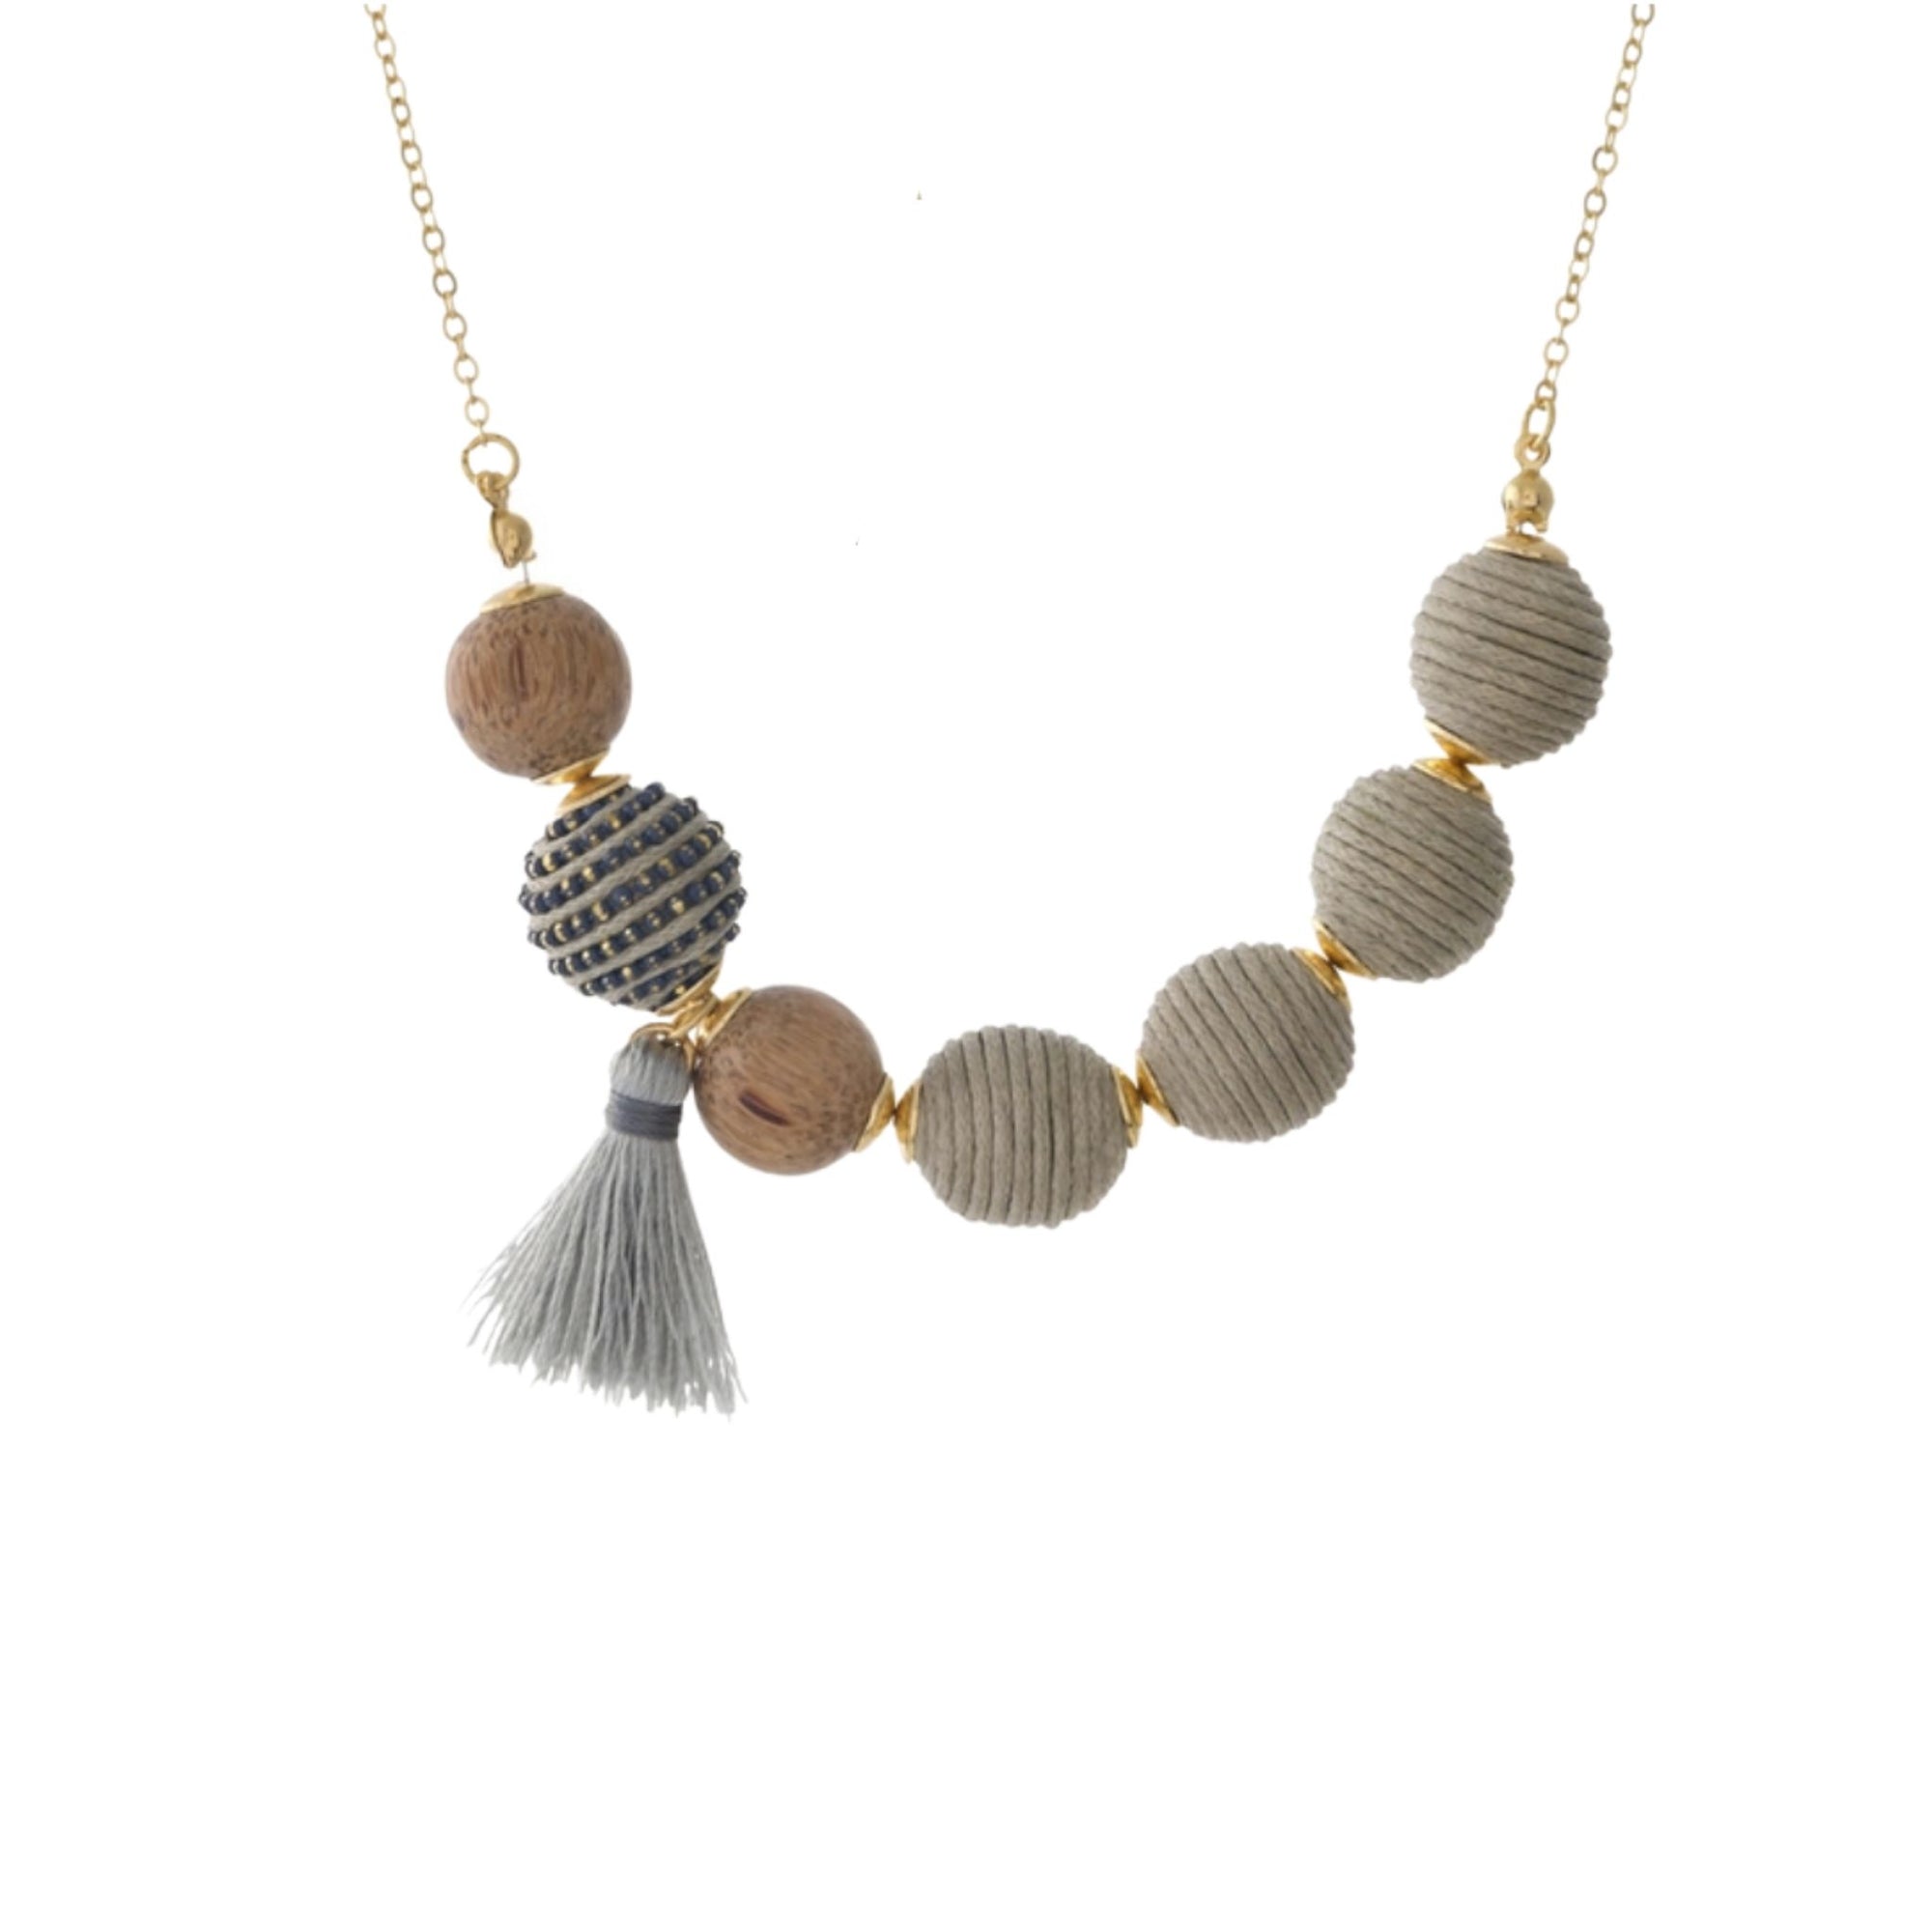 Gold tone necklace set with gray thread wrapped beads and wooden bead and tassel accents.